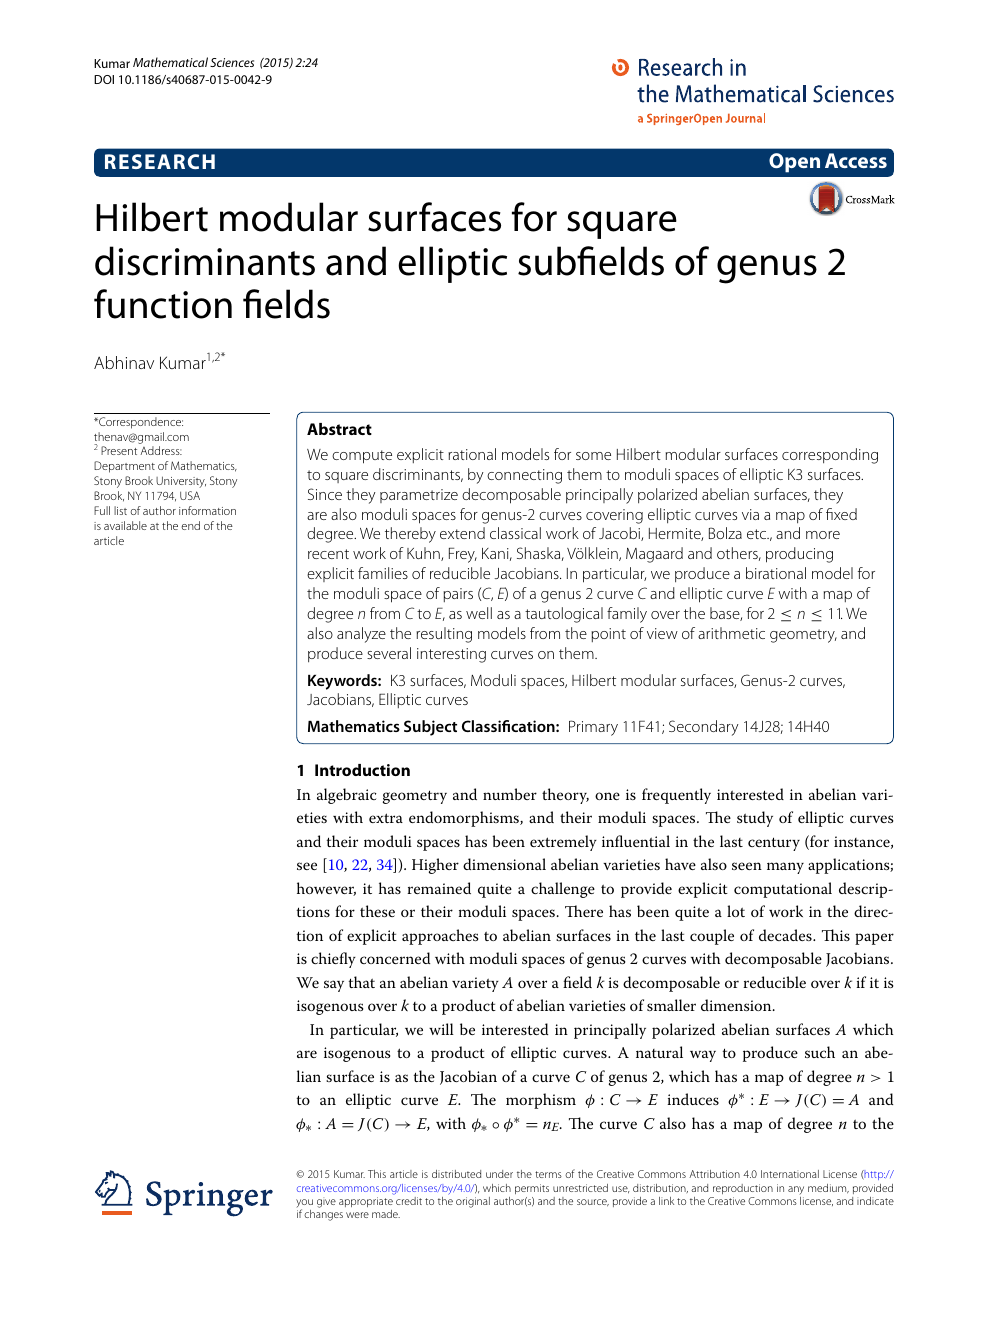 Hilbert Modular Surfaces For Square Discriminants And Elliptic